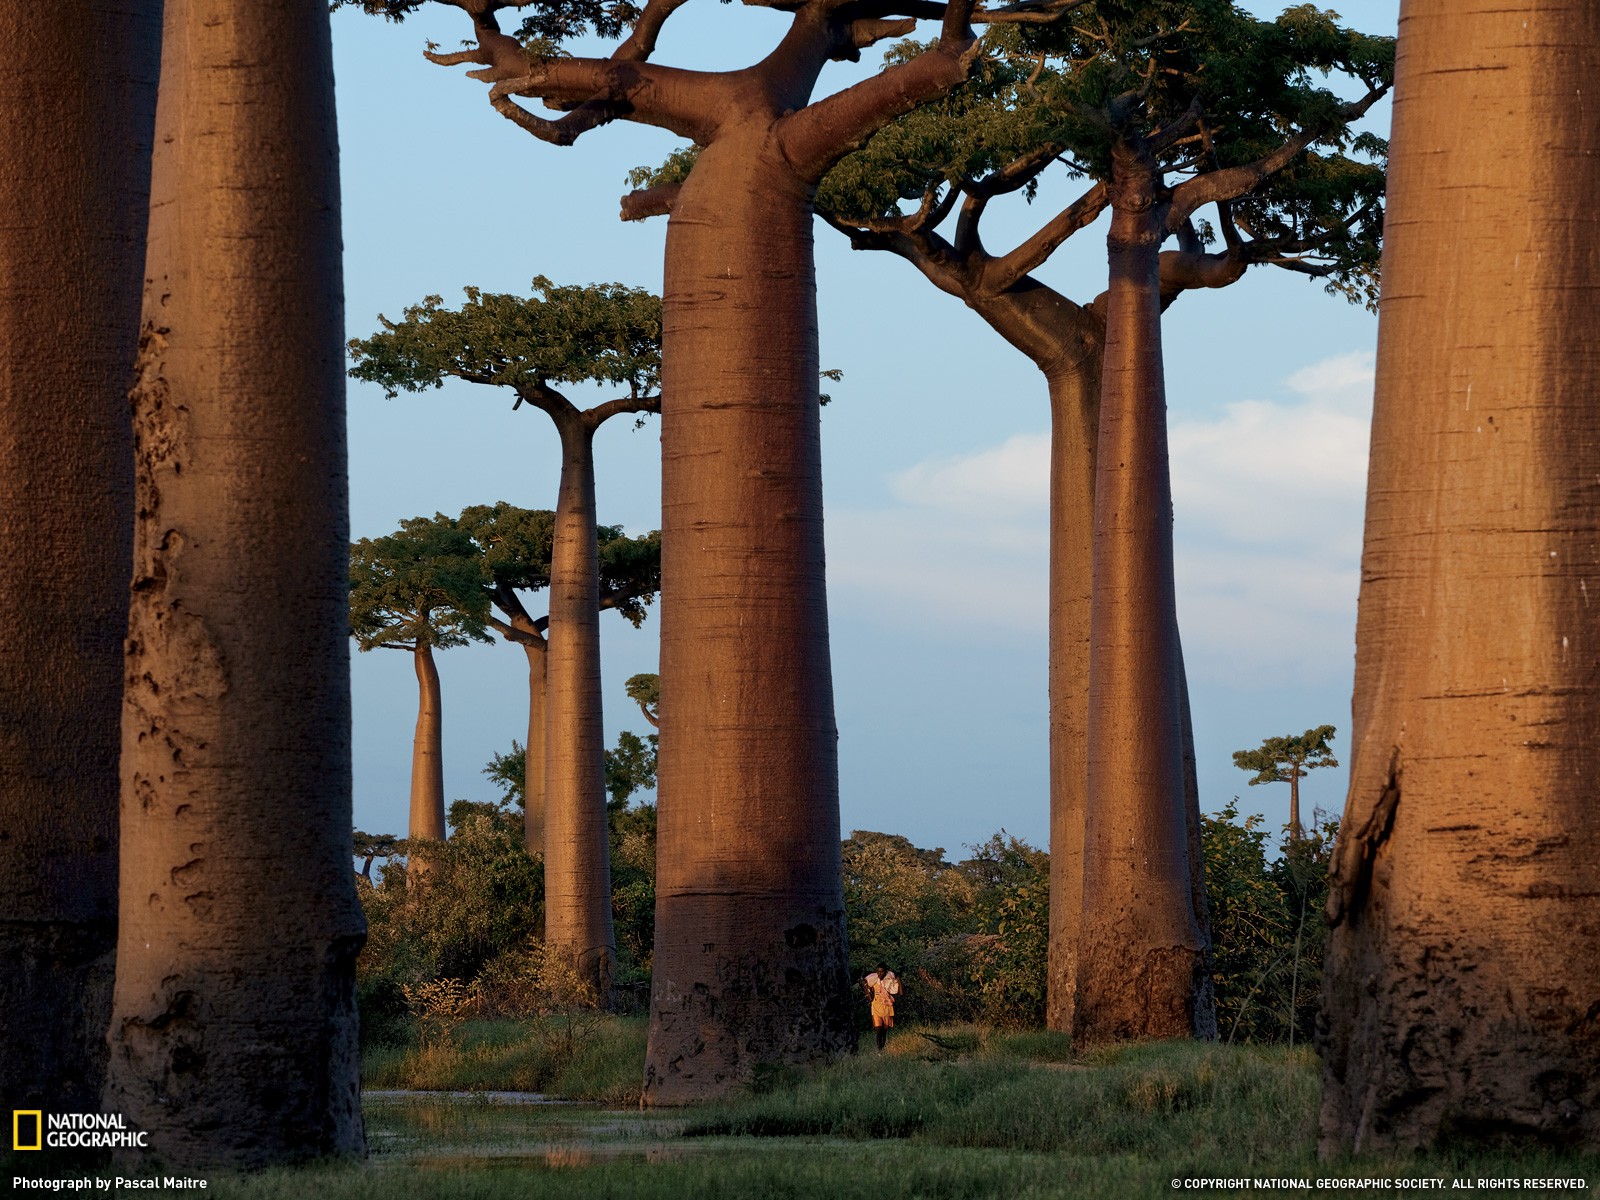 General 1600x1200 National Geographic trees Madagascar baobab trees baobabs nature plants